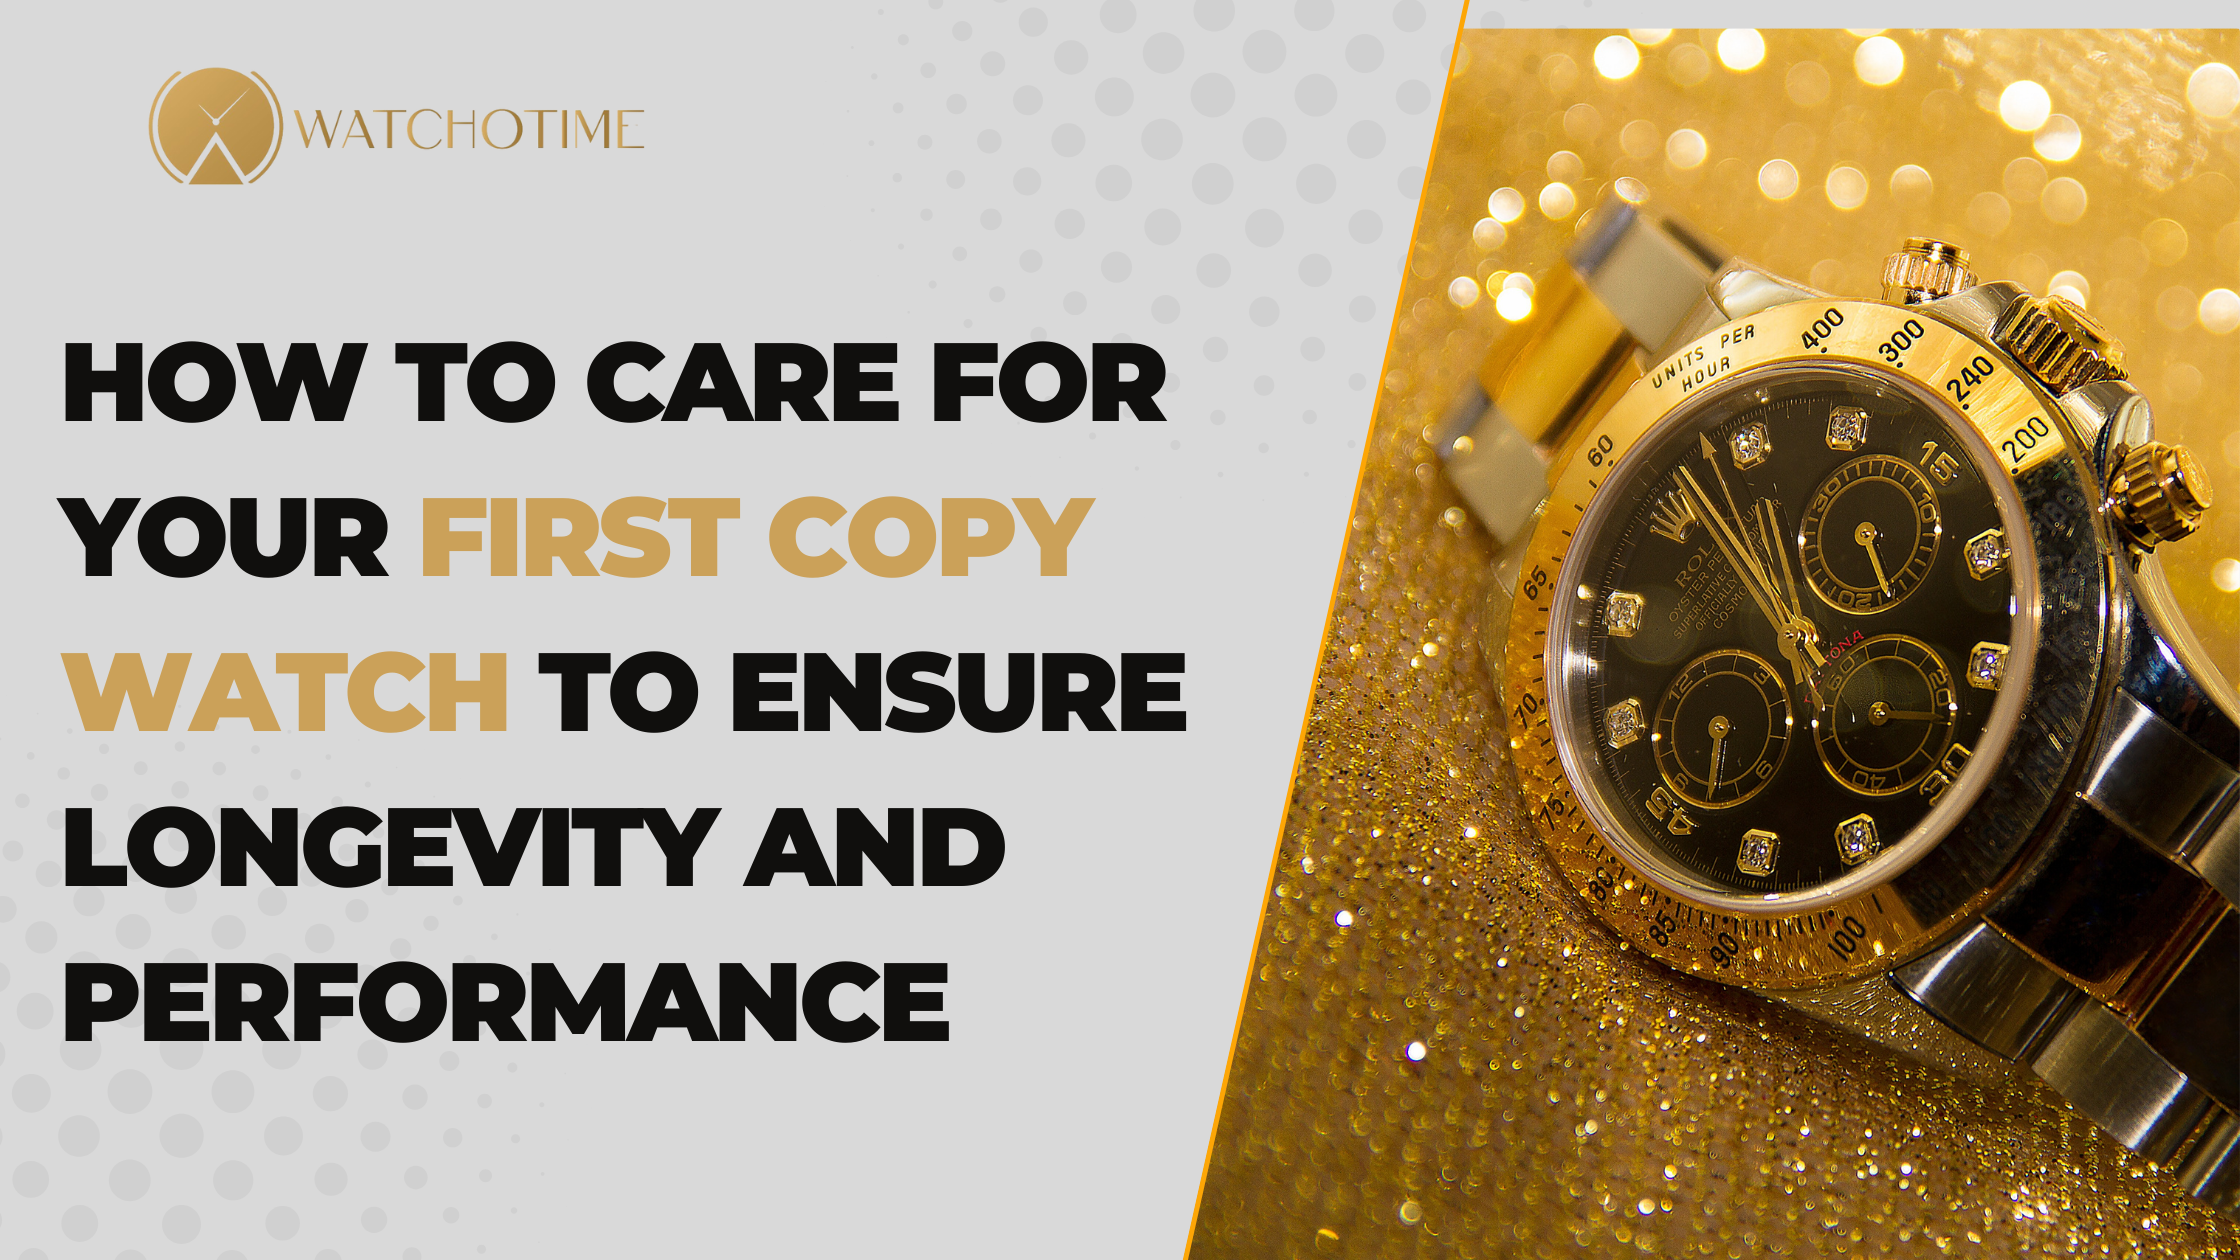 How to Care for Your First Copy Watch to Ensure Longevity and Performance